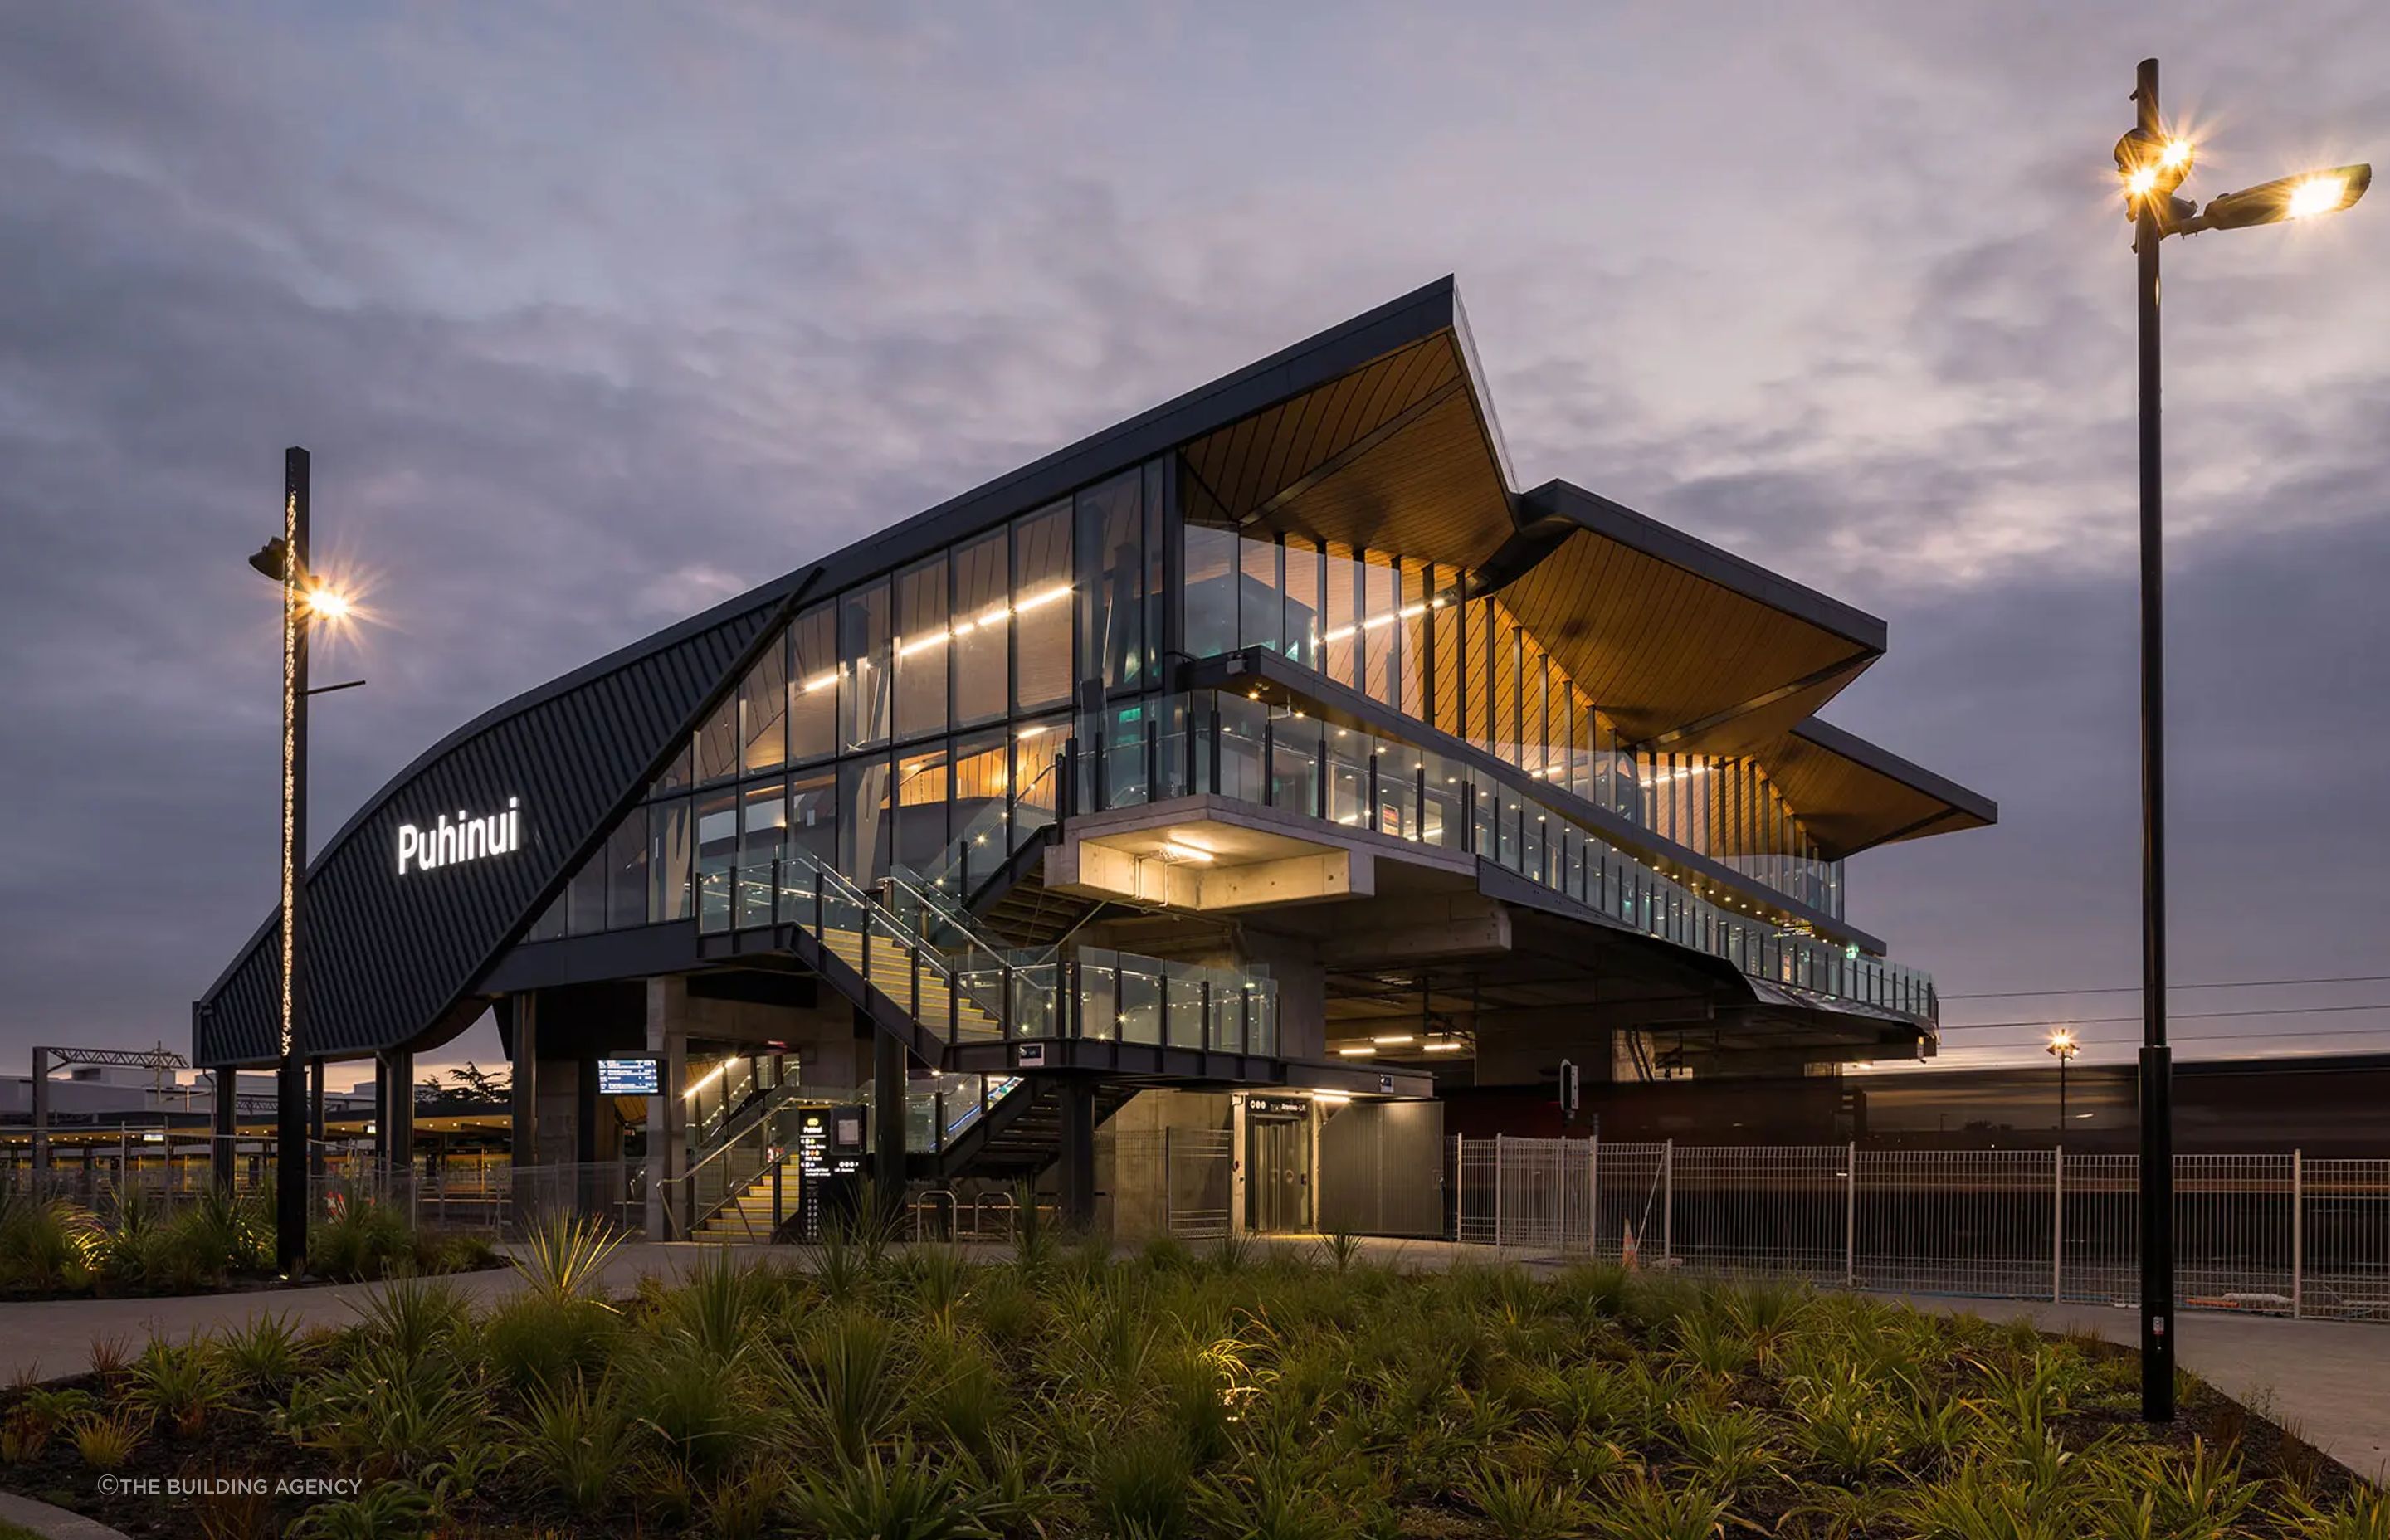 The Puhinui Station interchange showcases a striking and innovative modern commercial exterior facade.